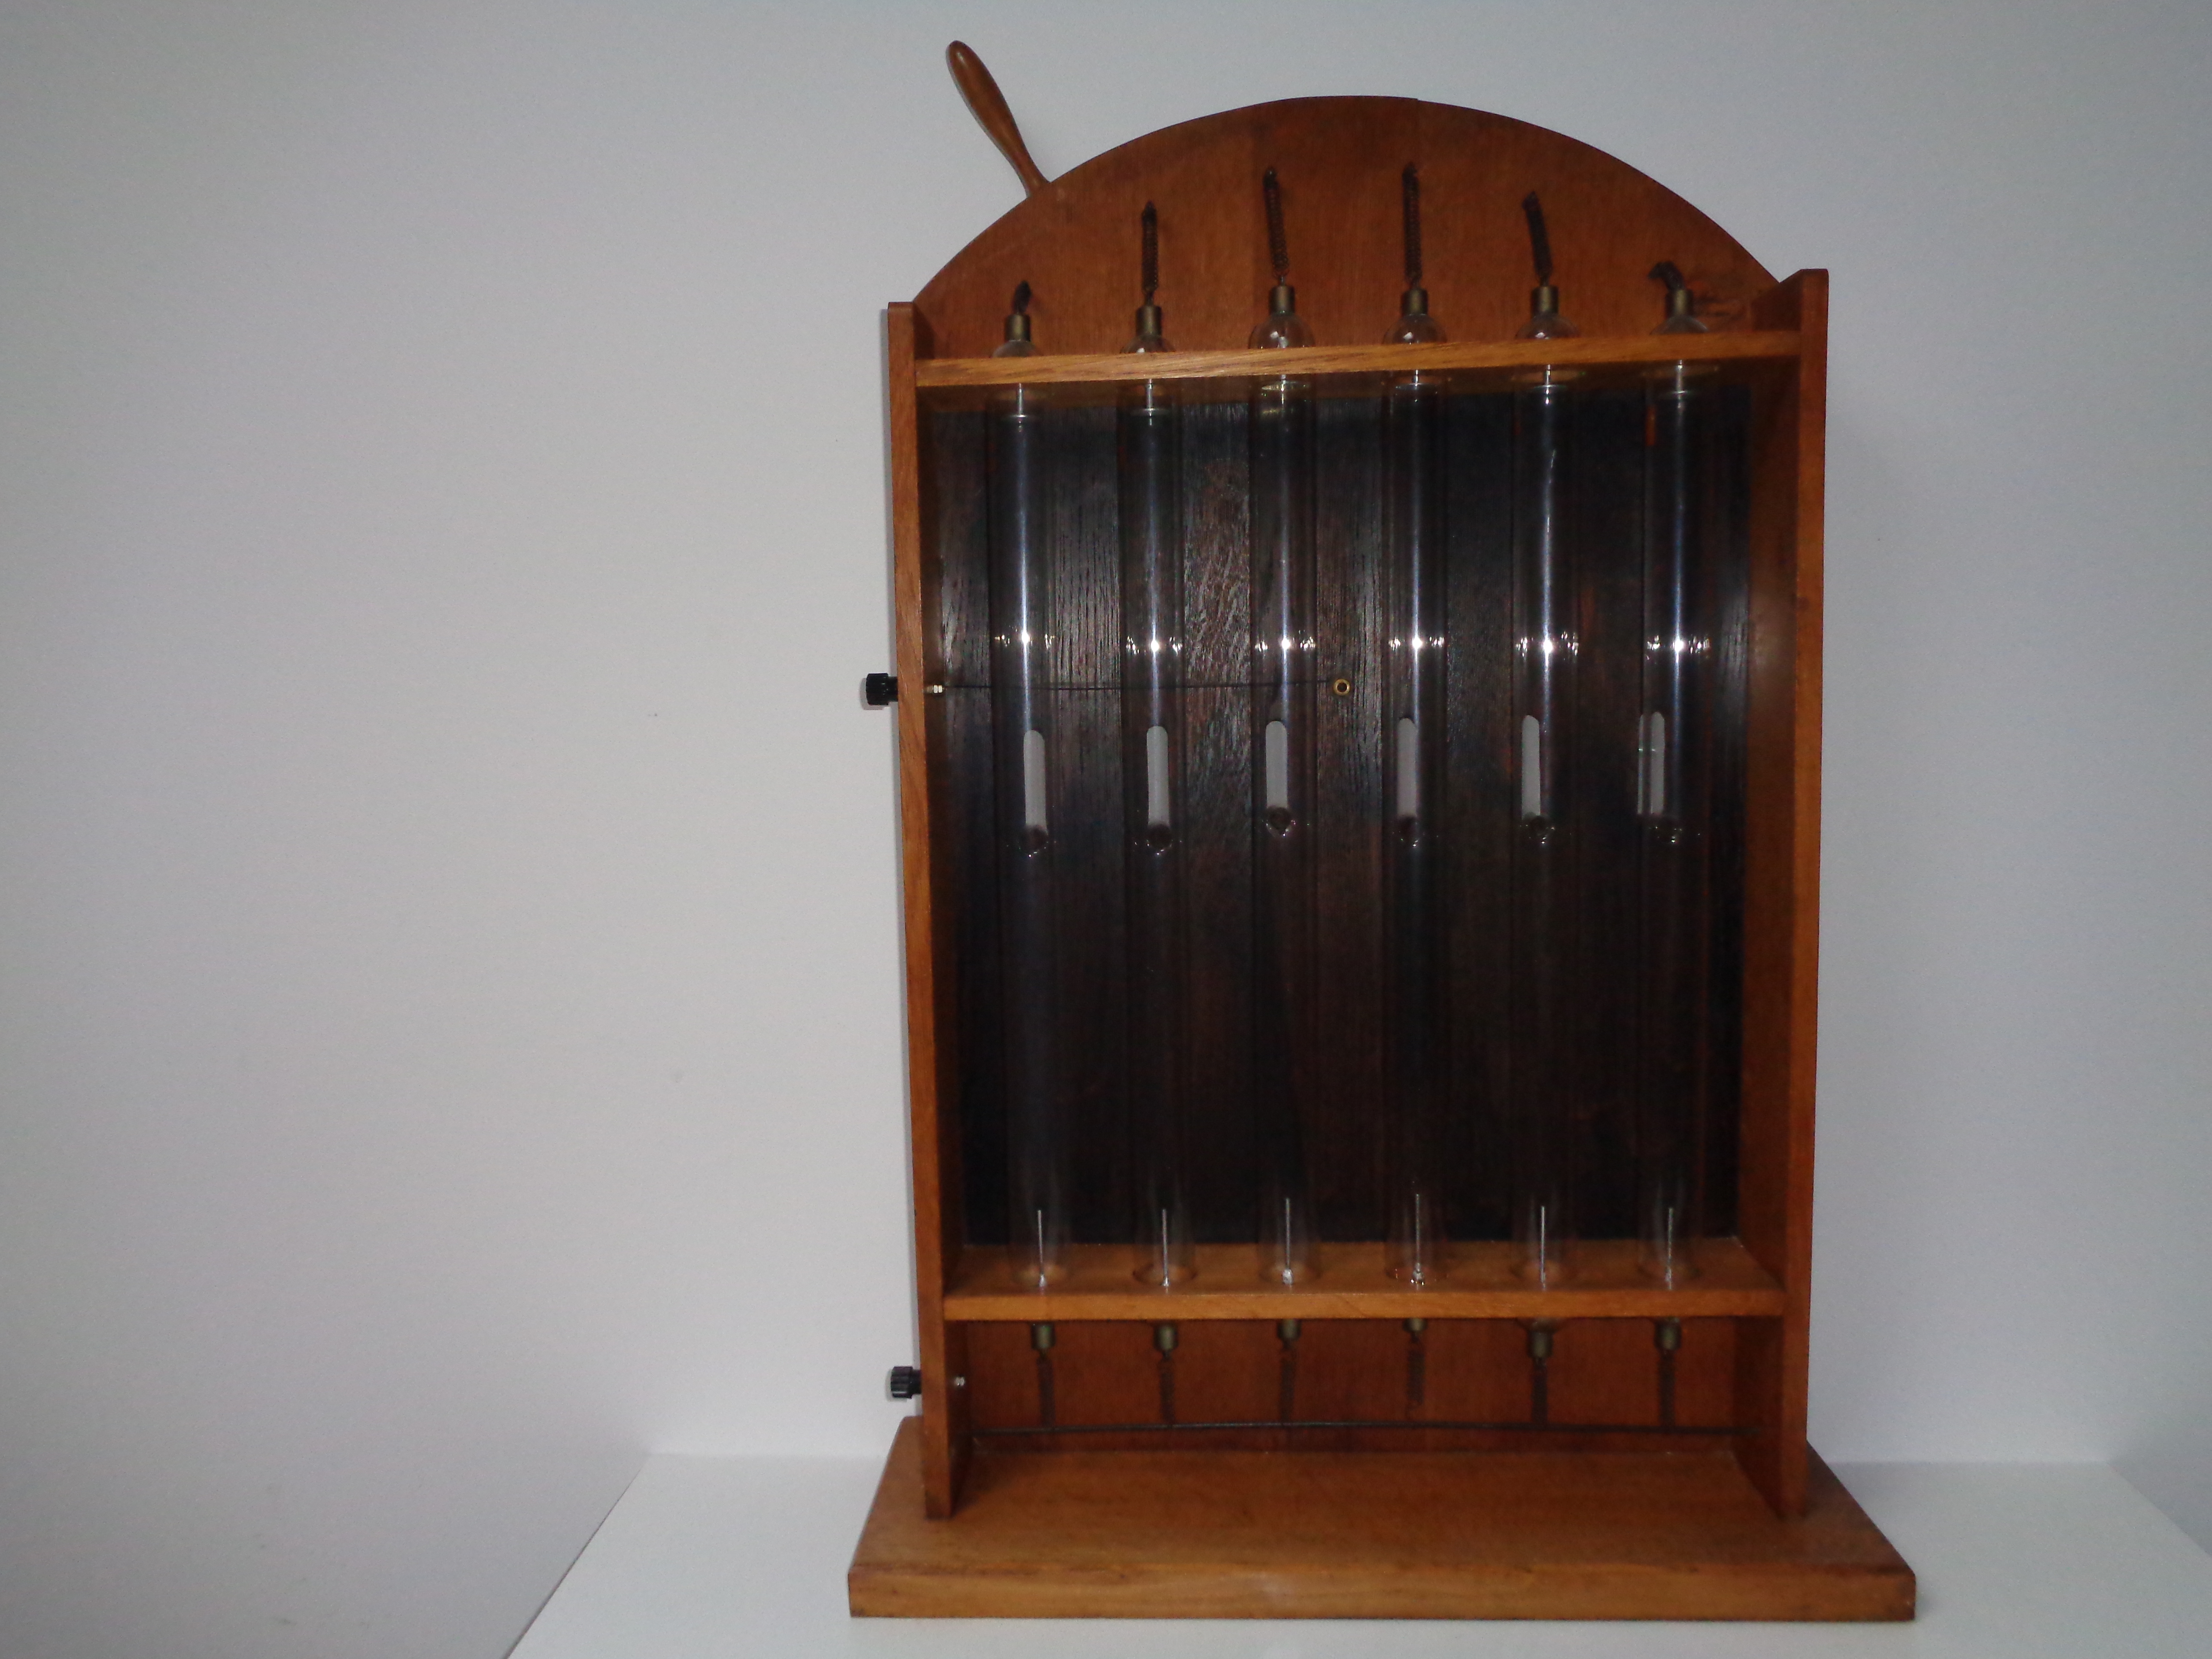 Geissler tube set in wood stand